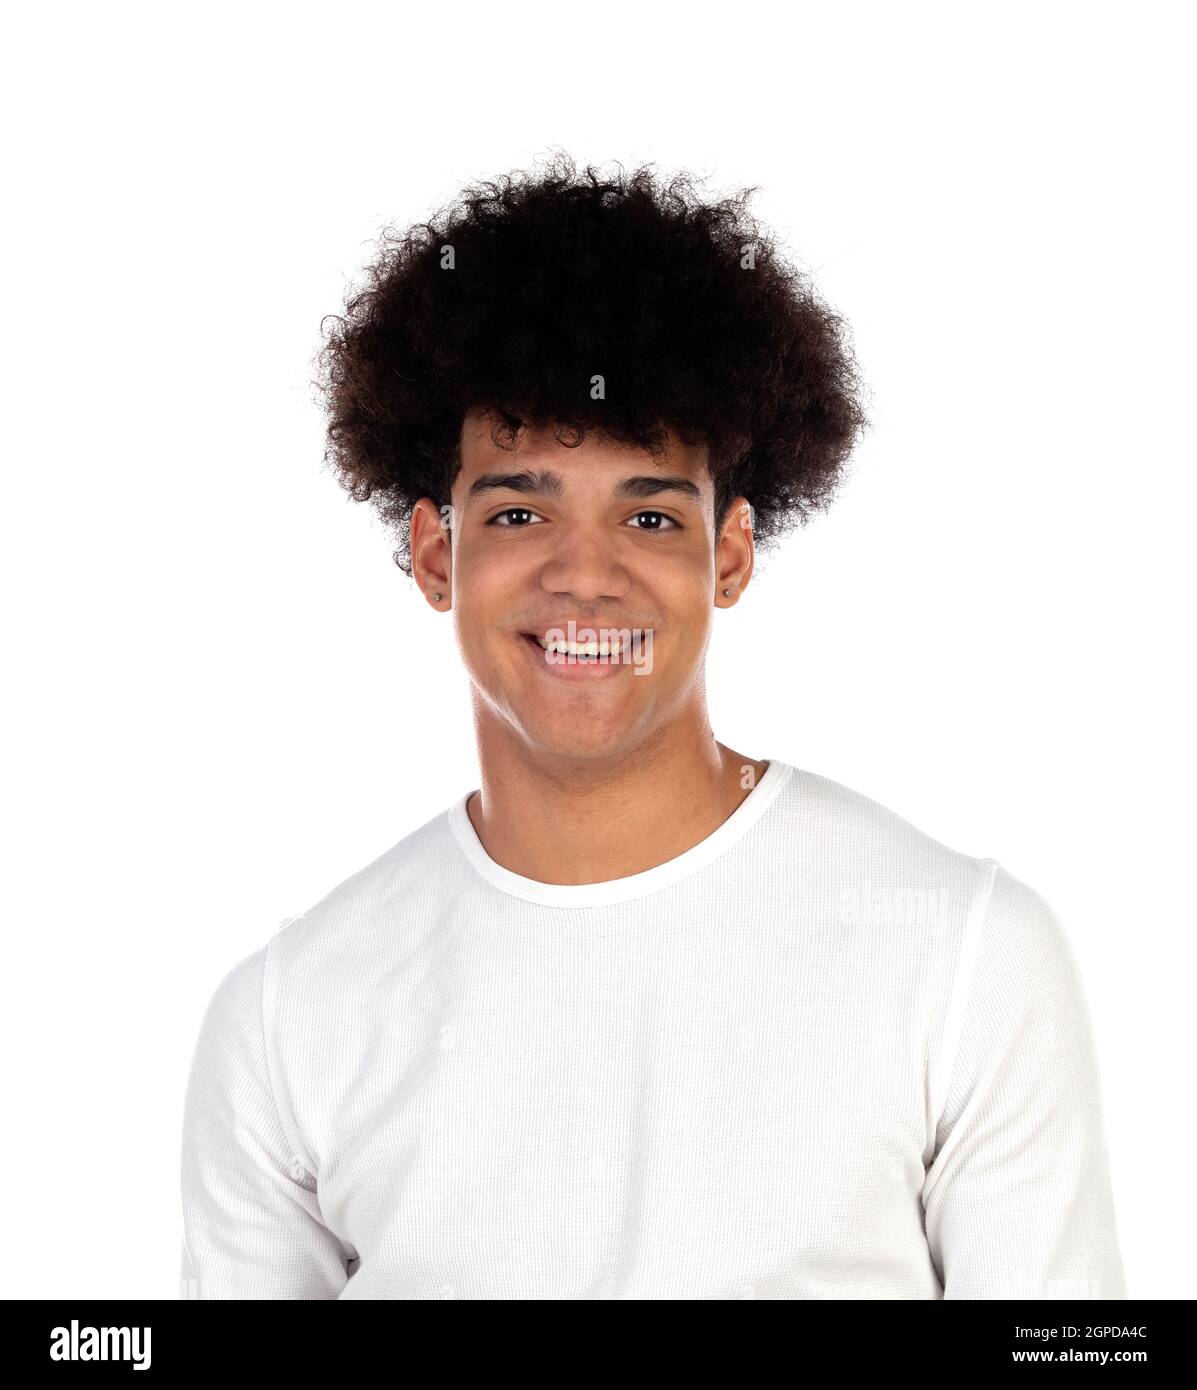 Teenager boy with afro hairstyle isolated on a white background Stock Photo  - Alamy